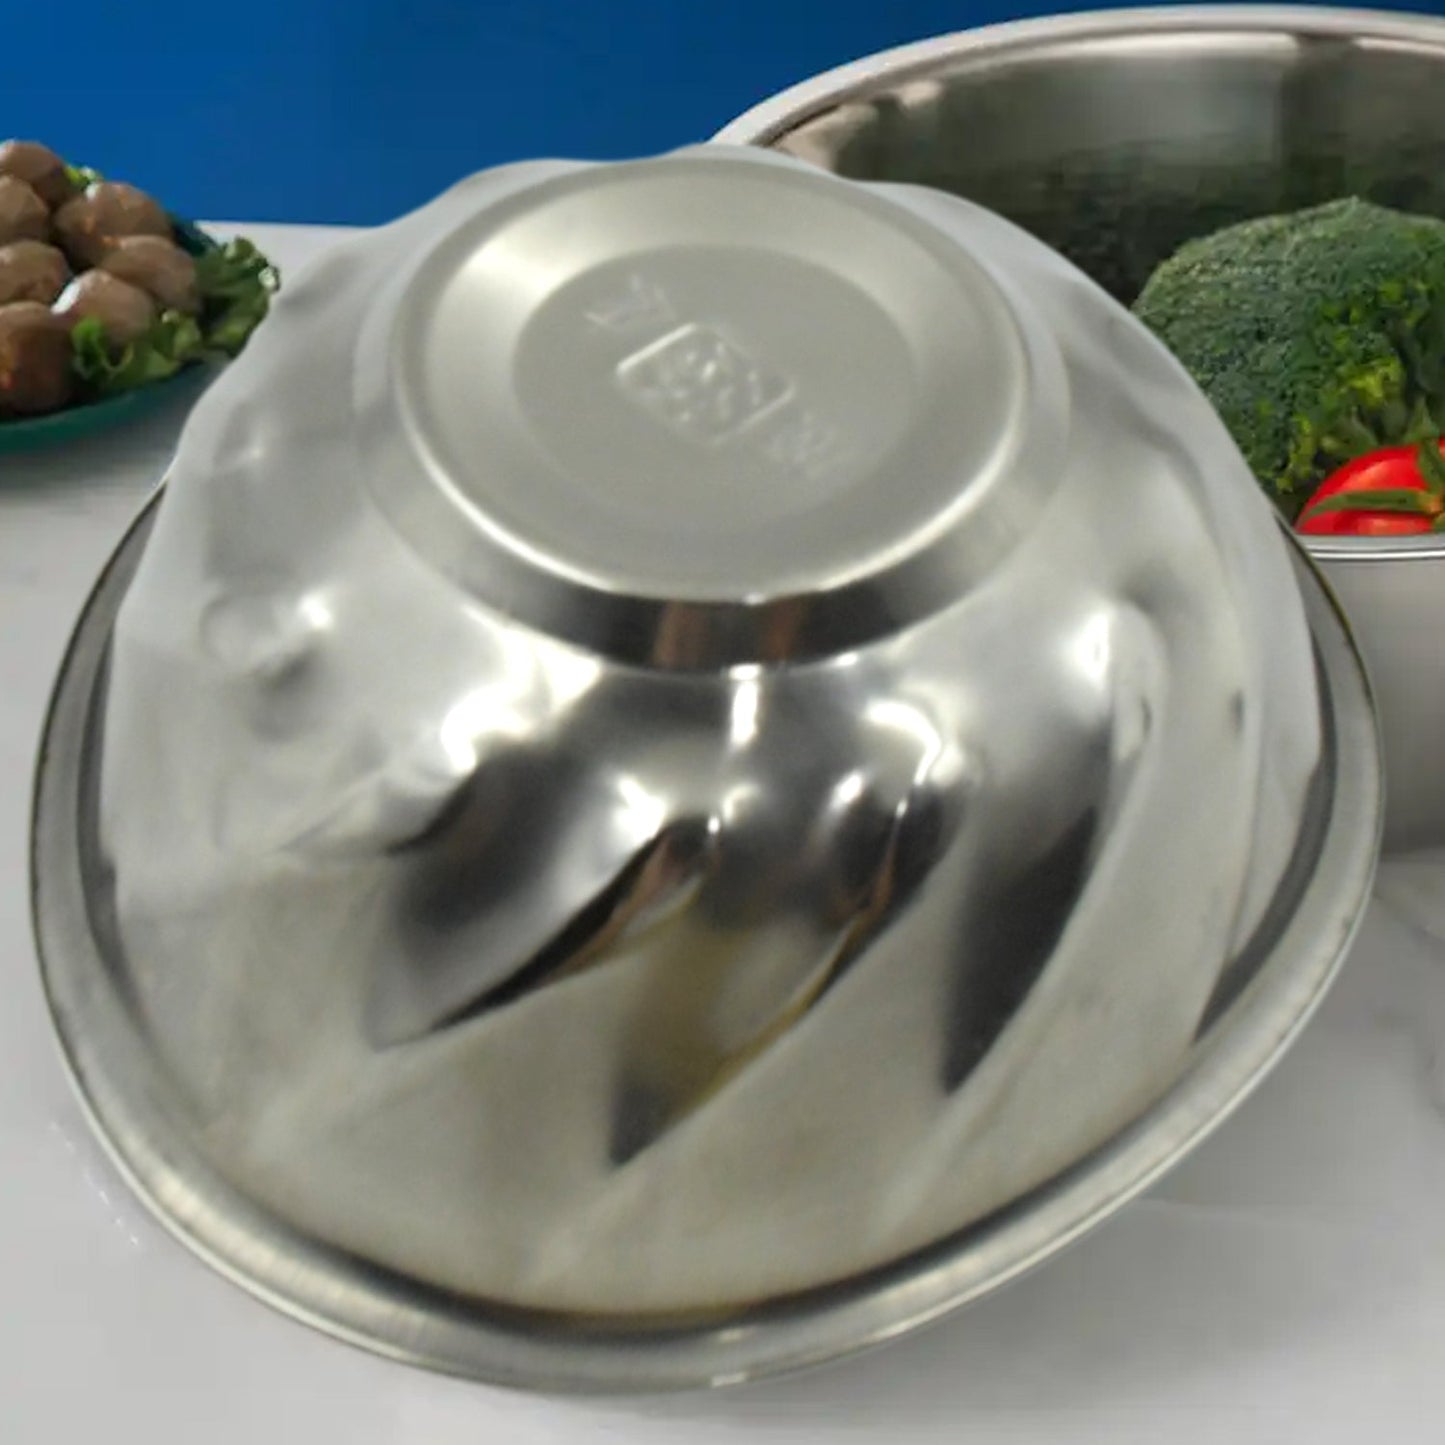 5507 Stainless Steel Bowl | Serving Dessert Curry Soup Bowls Wati Vati Katori | Small Rice Side Dishes | Kitchen & Dining ,Solid, ideal for serving Chatni, achar and Catch up (1 Pc)